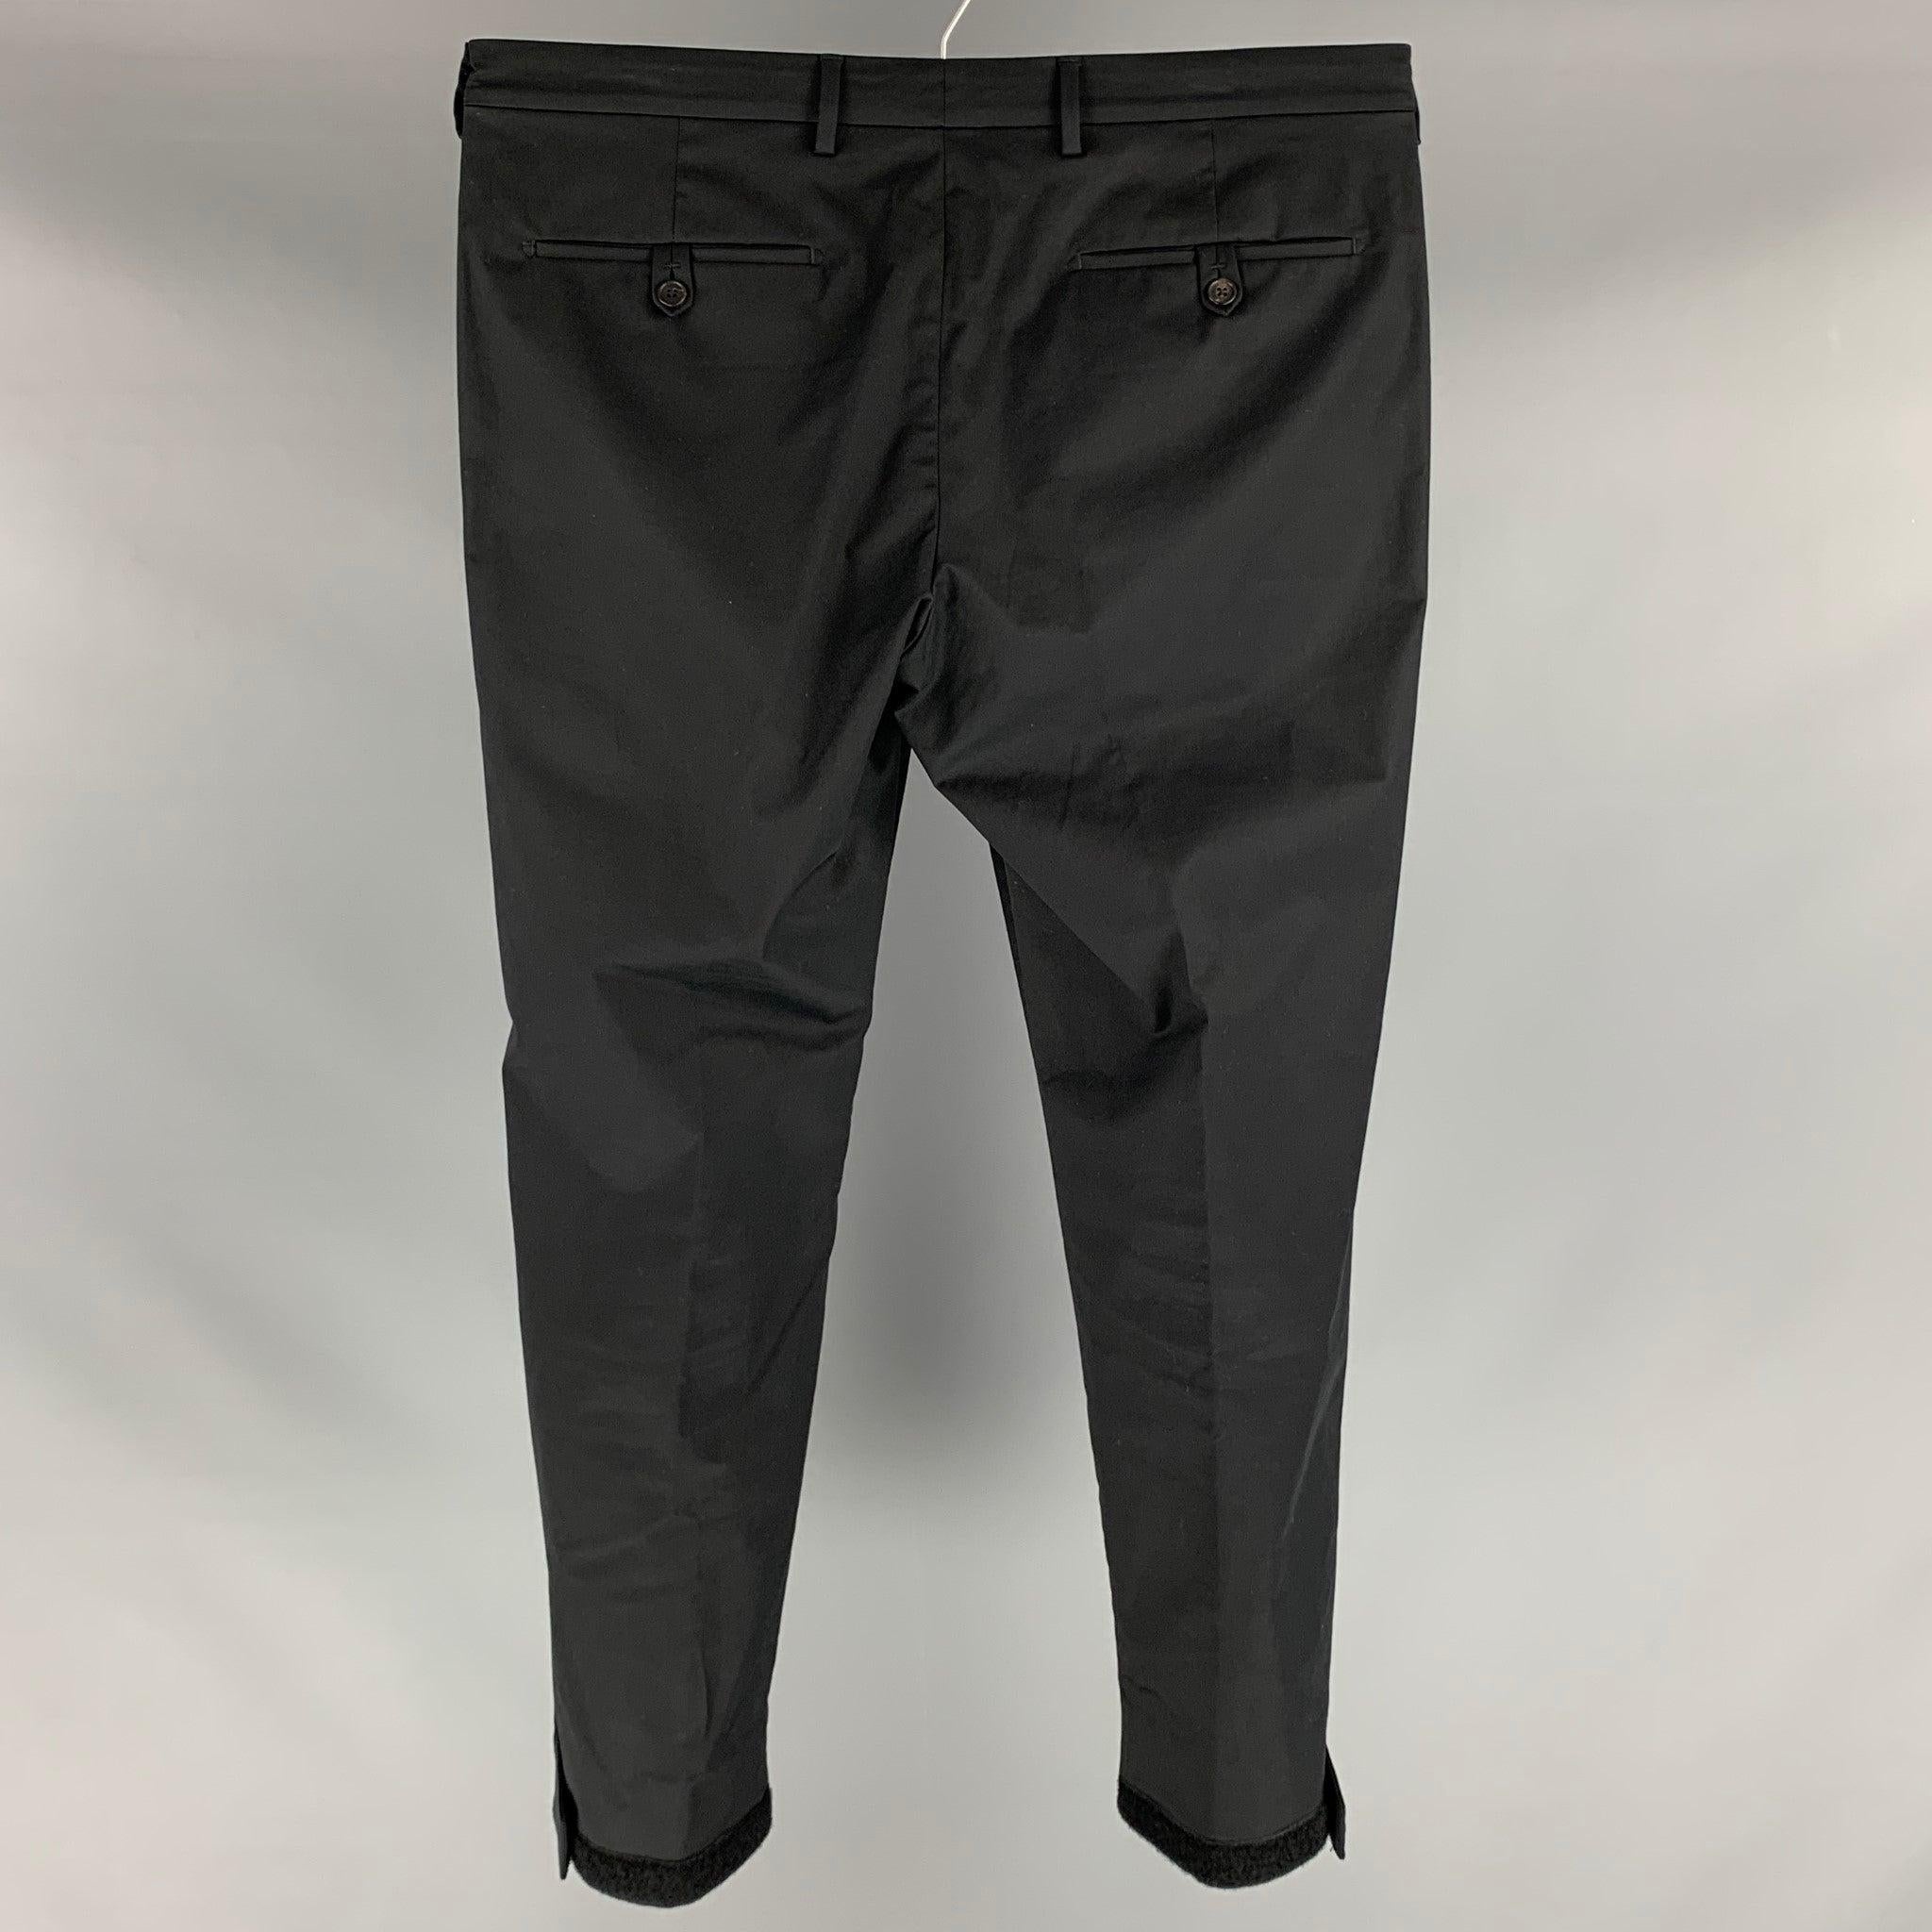 PRADA dress pants comes in black cotton and elastane material featuring a flat front, velcro cuffed leg, front tab, and a zip fly closure. Excellent Pre-Owned Condition. 

Marked:   50 

Measurements: 
  Waist: 36 inches Rise: 10 inches Inseam: 32